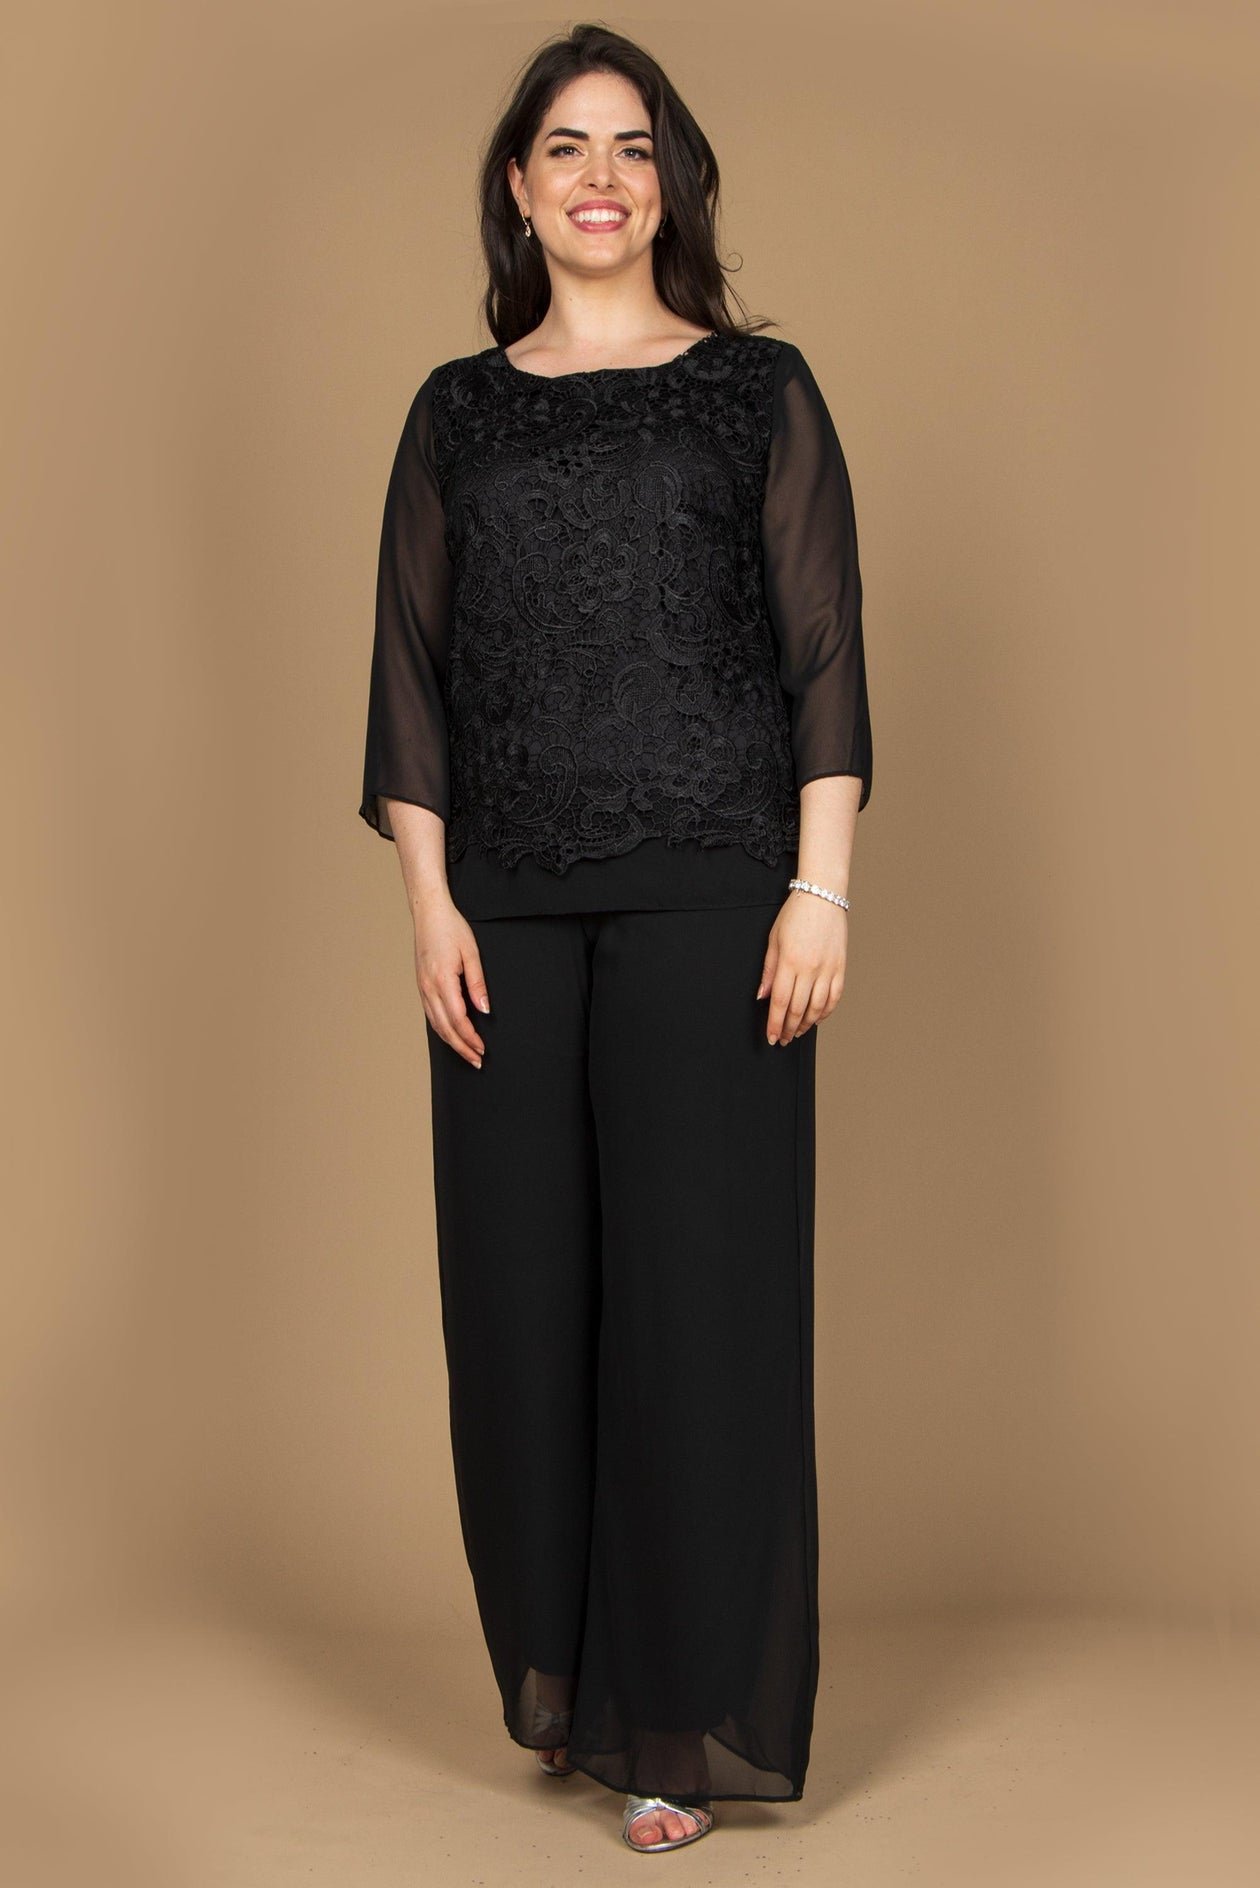 Trending Wholesale plus size palazzo pants suits At Affordable